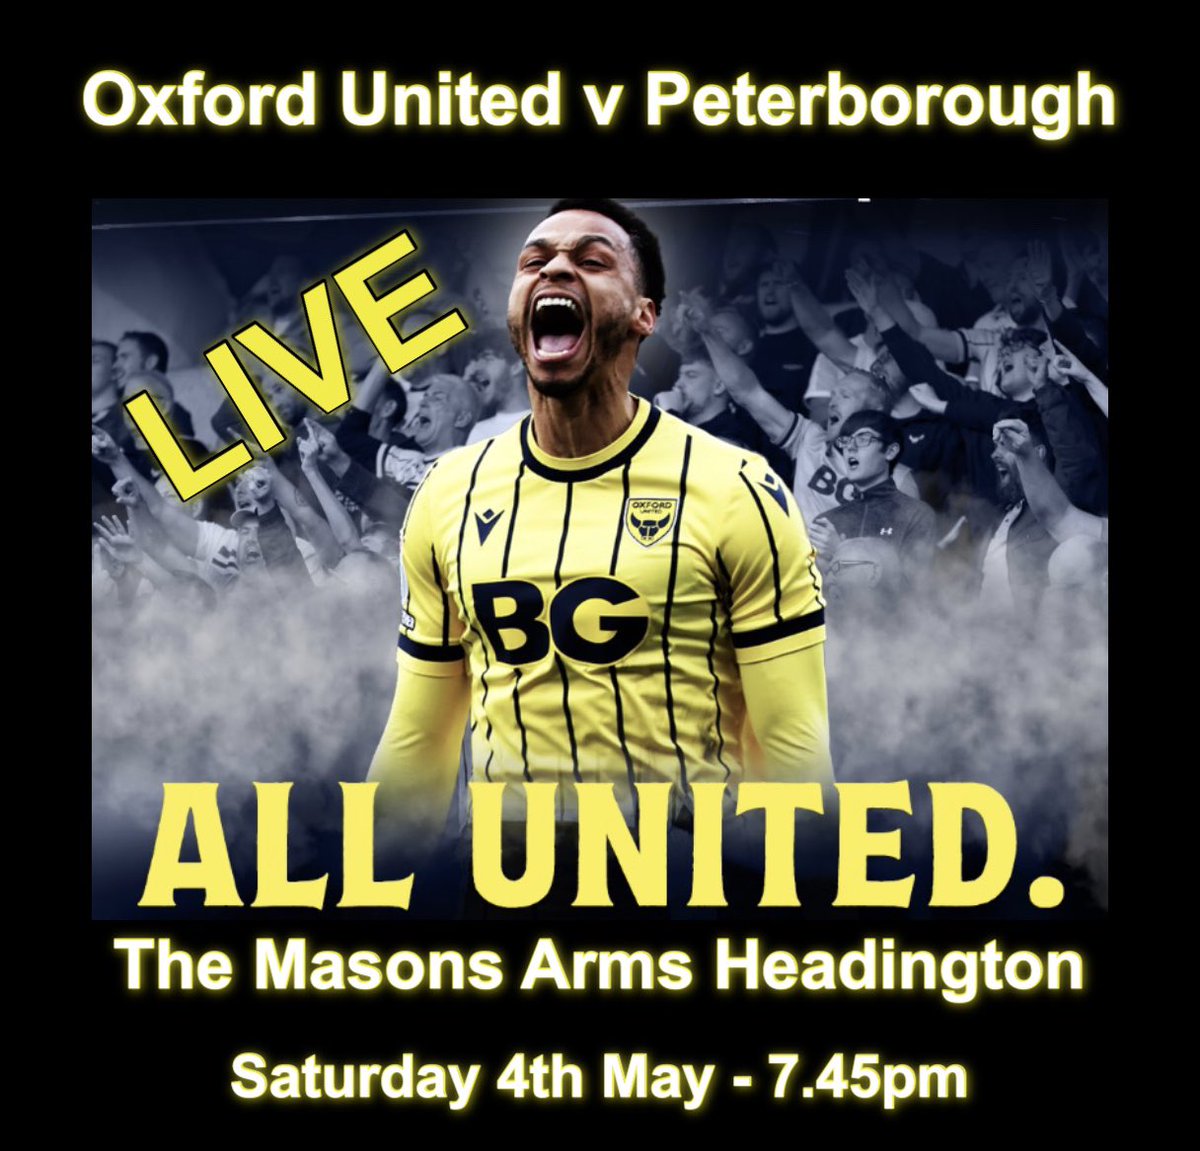 If you missed the tickets both legs will be Live @TheMasonsArmsHQ #oufc #headington #oxford